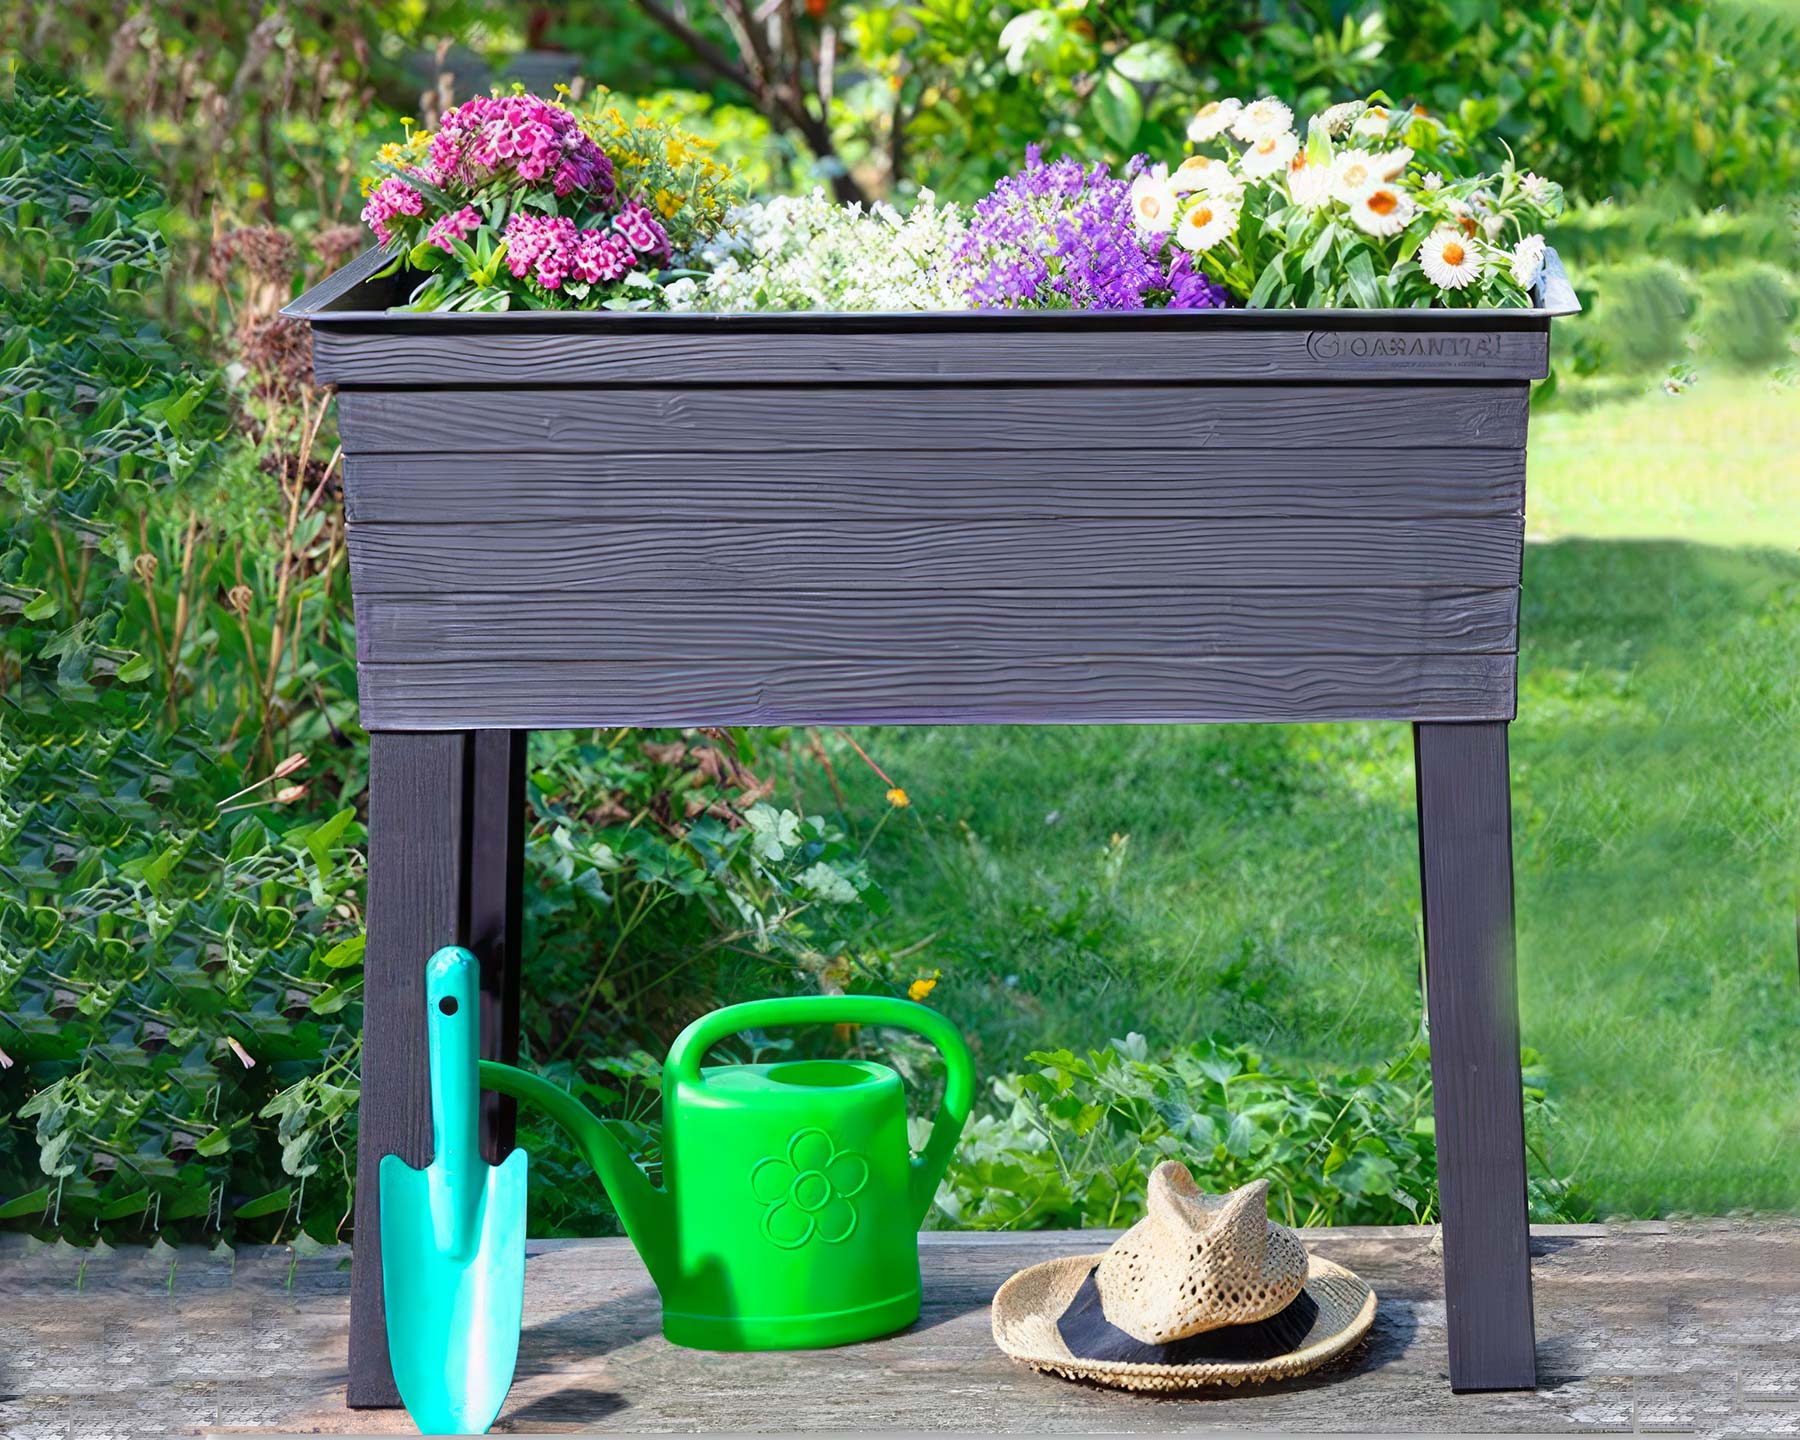 Urban Raised Planter an attractive addition to any balcony, patio or small garden.